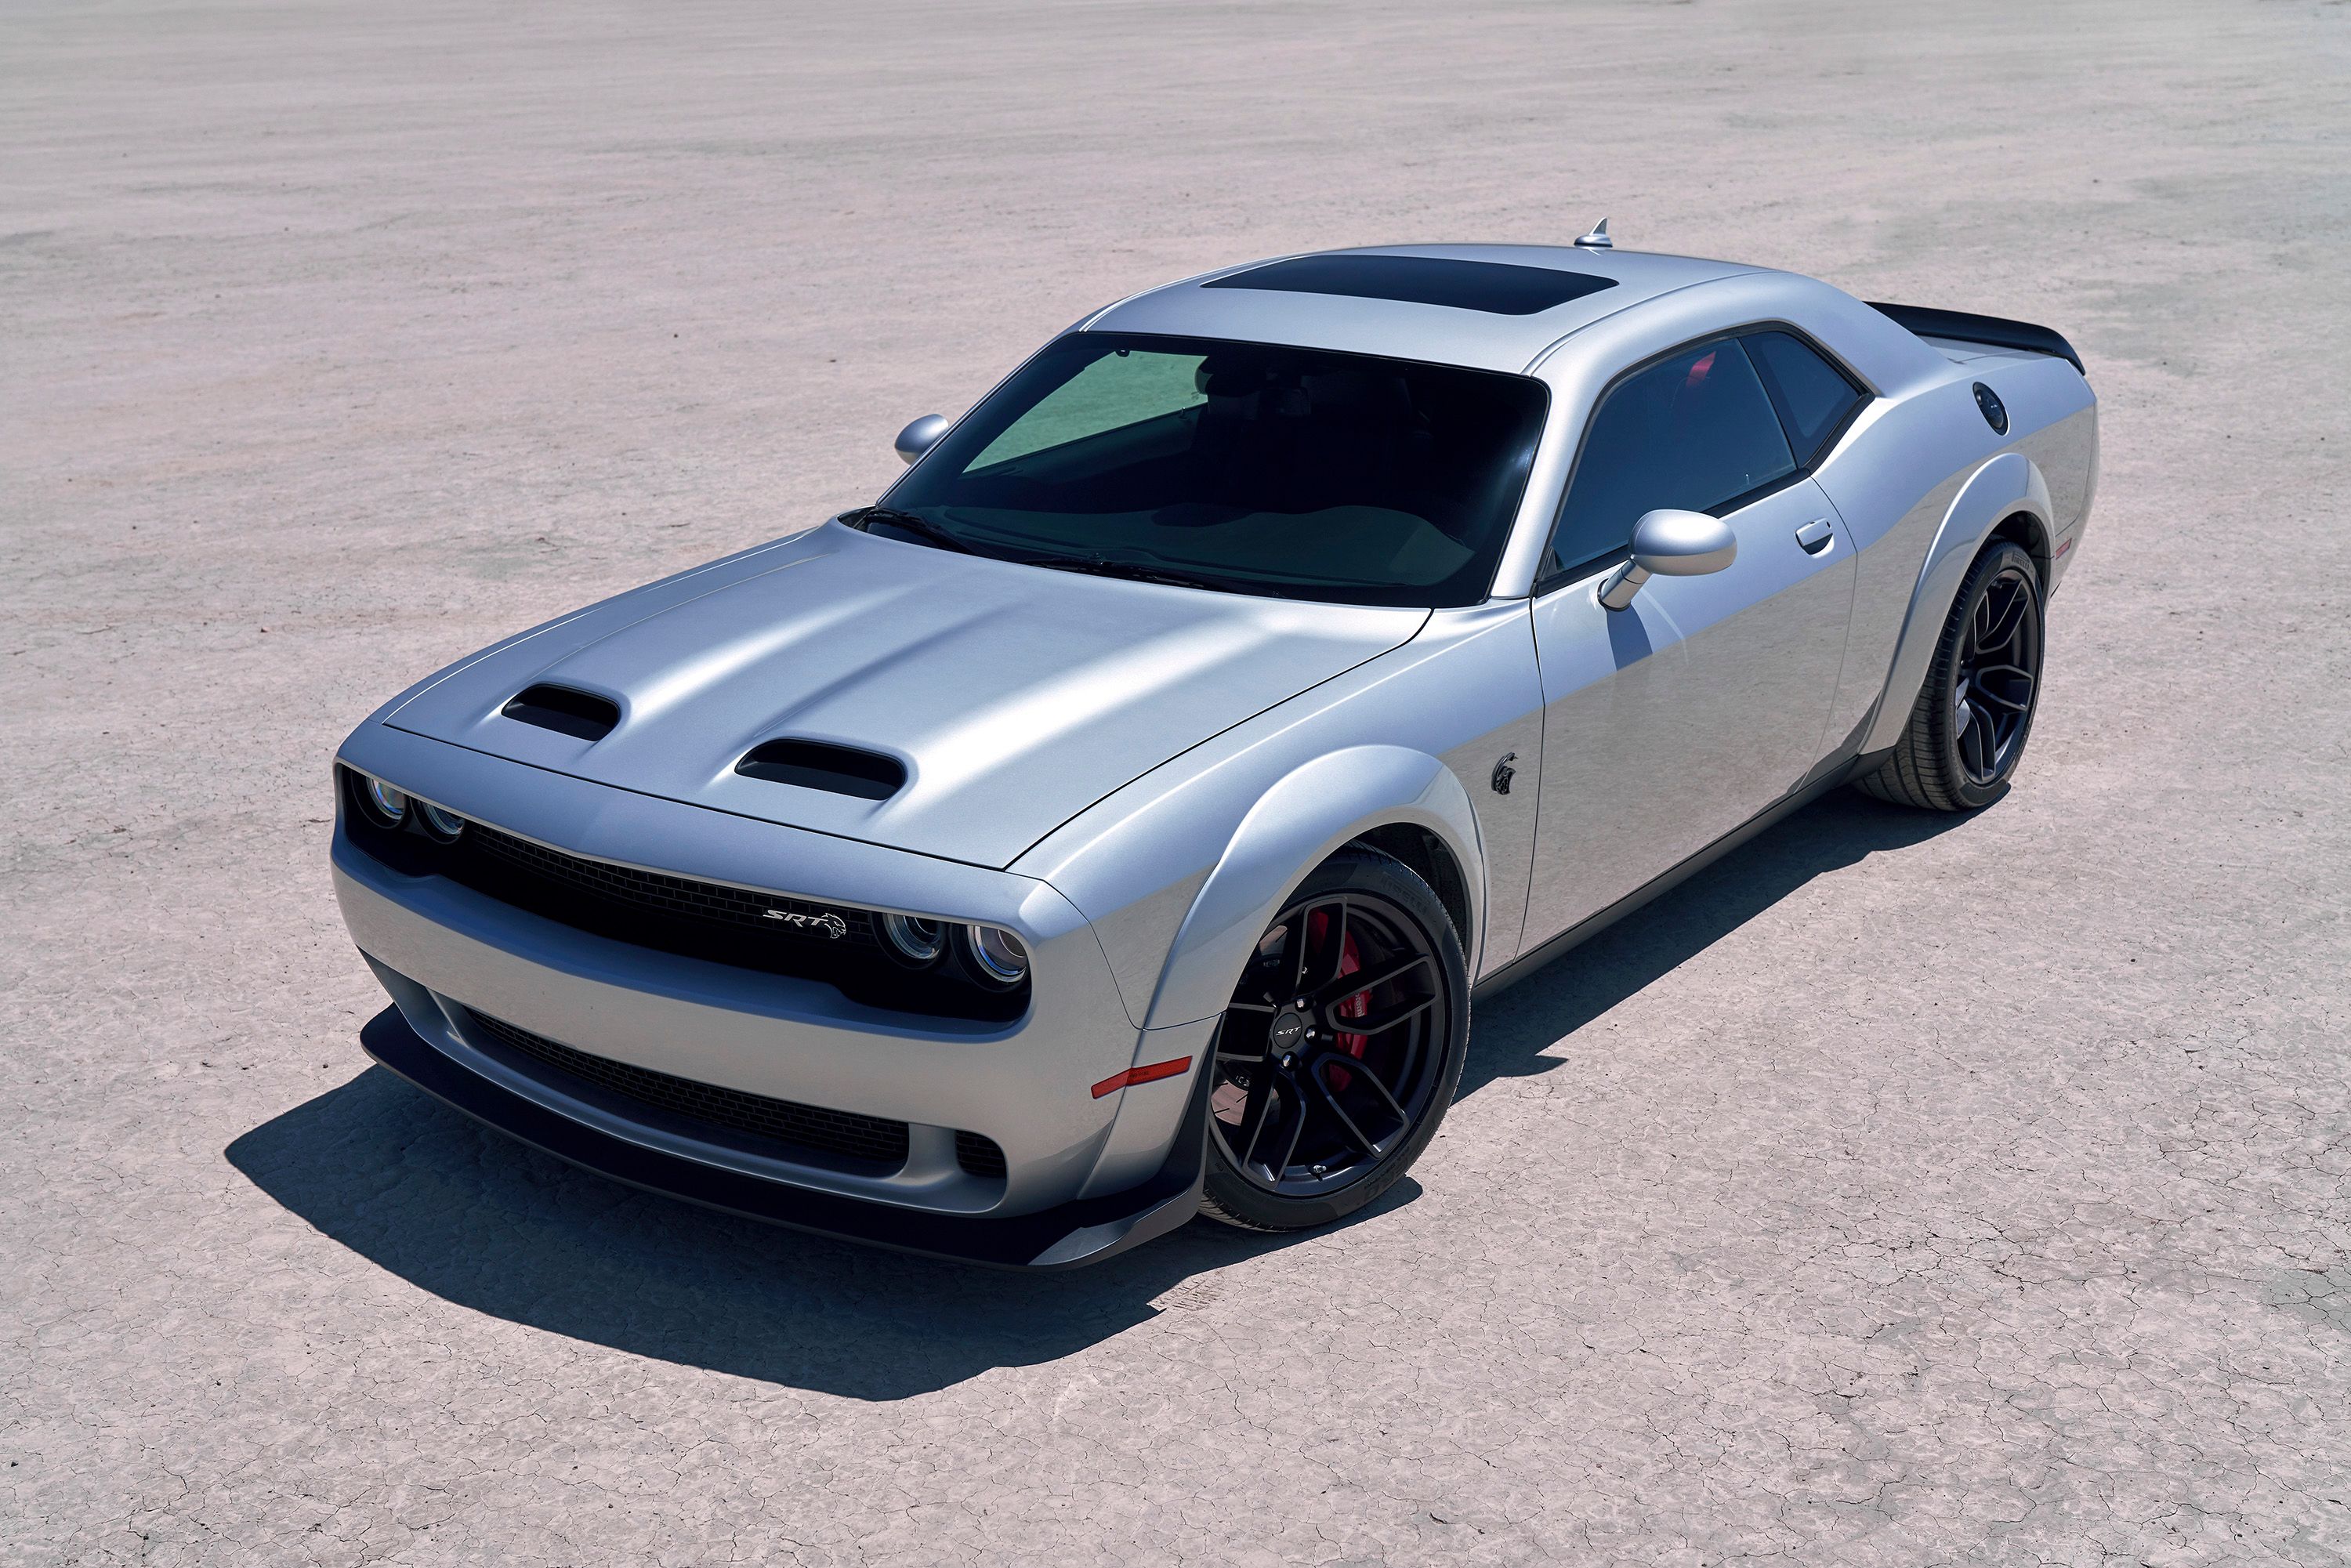 Dodge Sends Off The Supercharged V-8 With a Bang